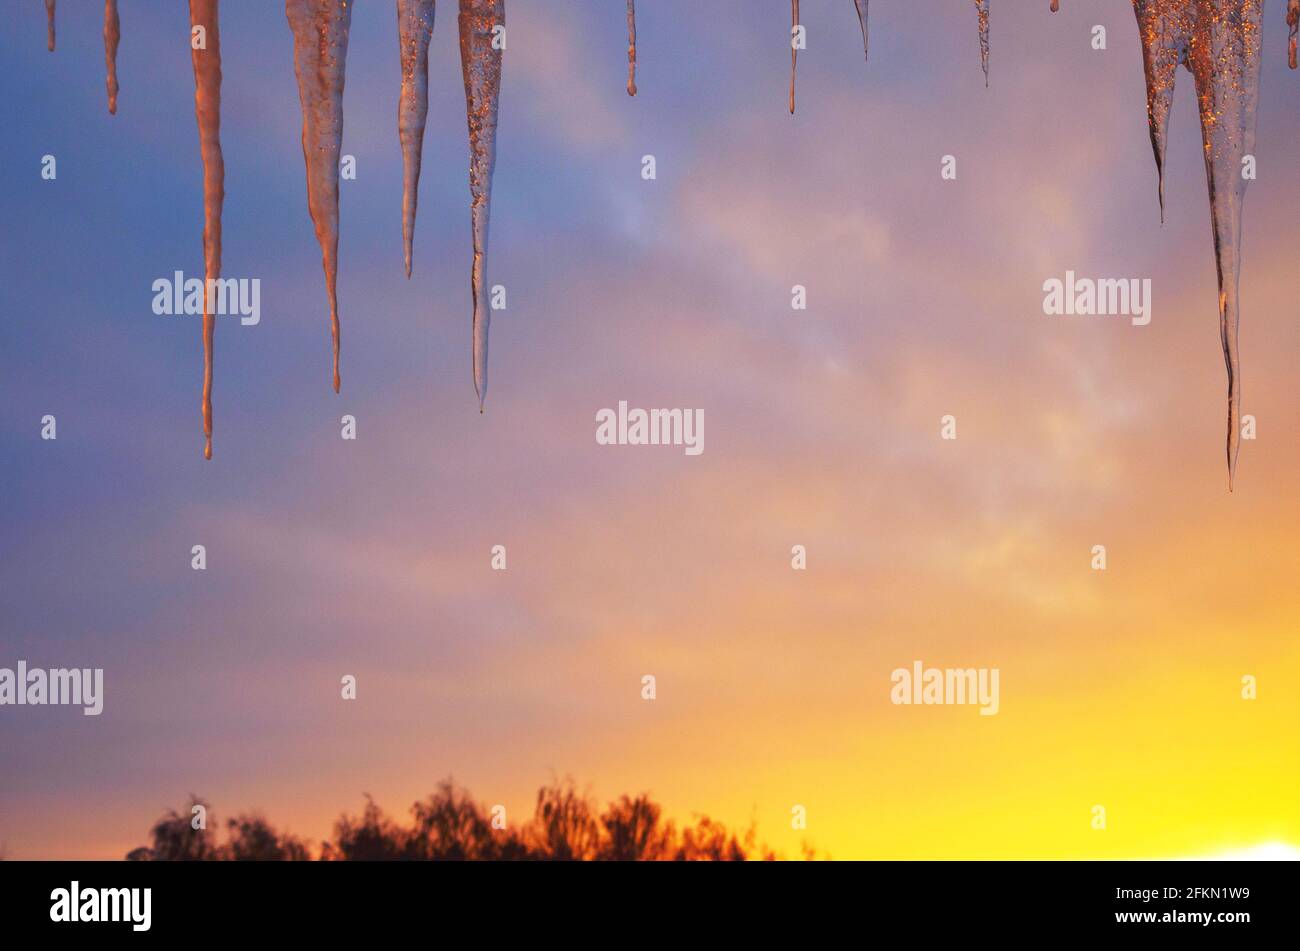 Hanging icicles on a background of setting sun and sunset sky. Stock Photo